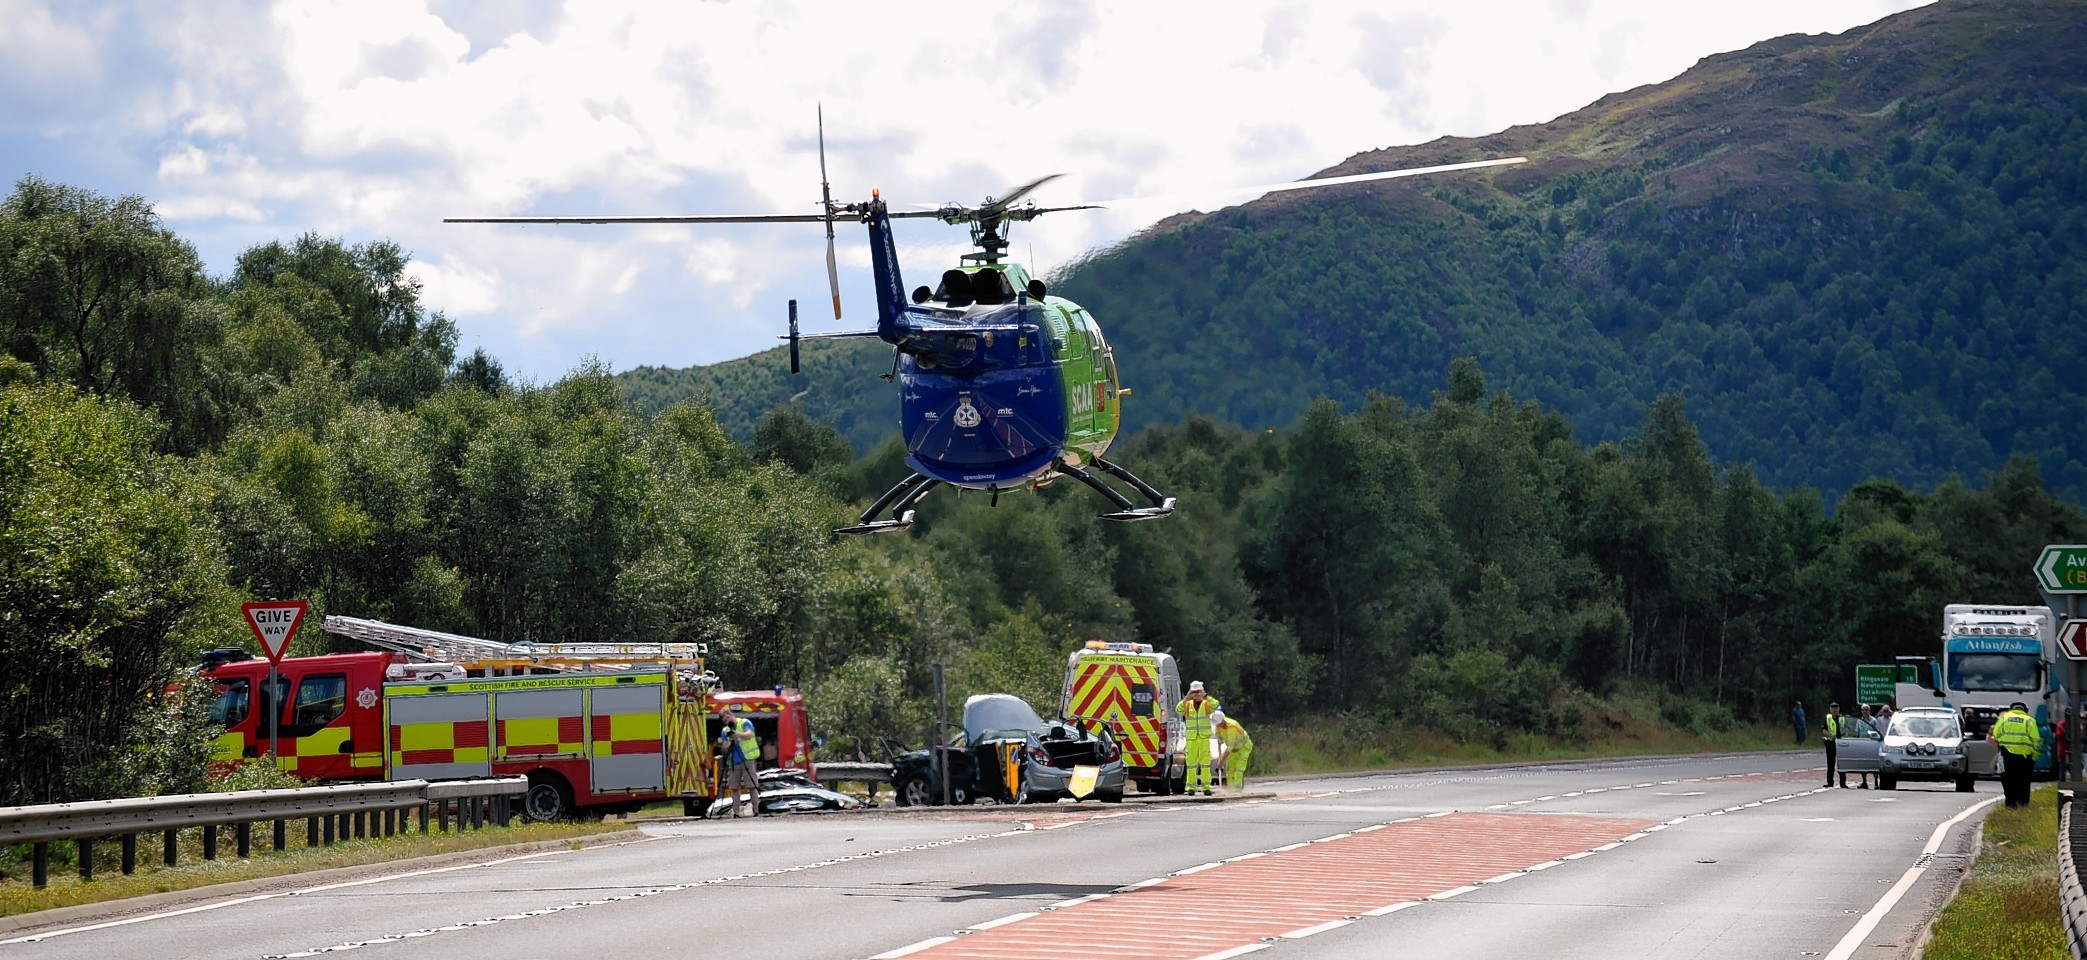 A woman was airlifted to hospital following the crash at Granish on the A9